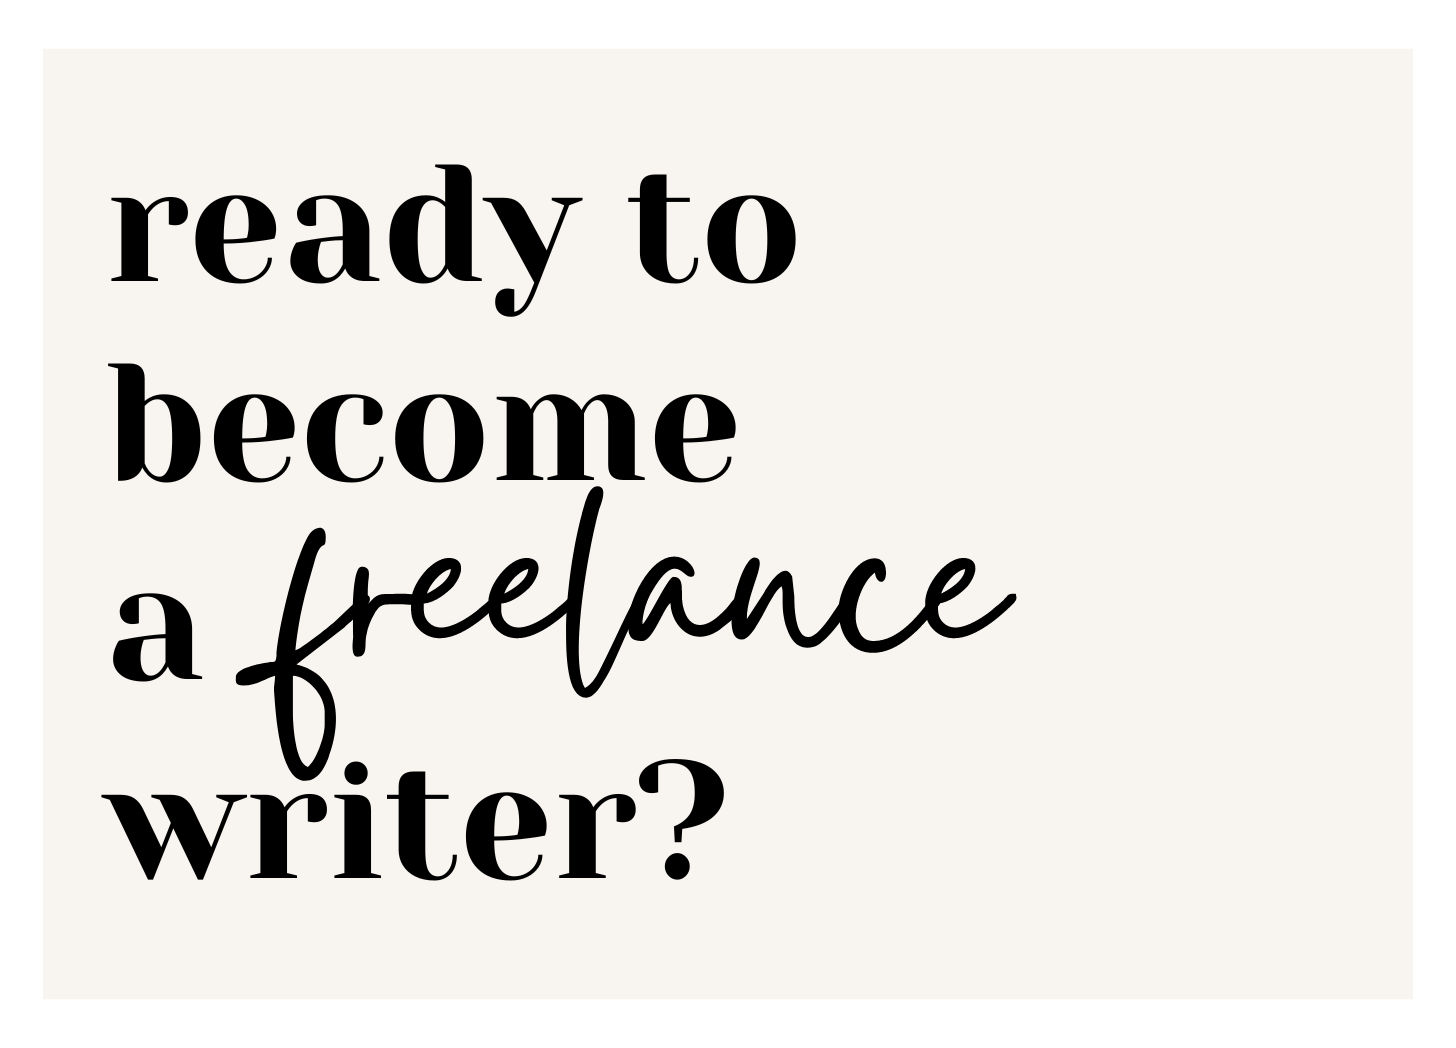 Black text on a cream colored background that reads "Are you ready to become a freelance writer?"